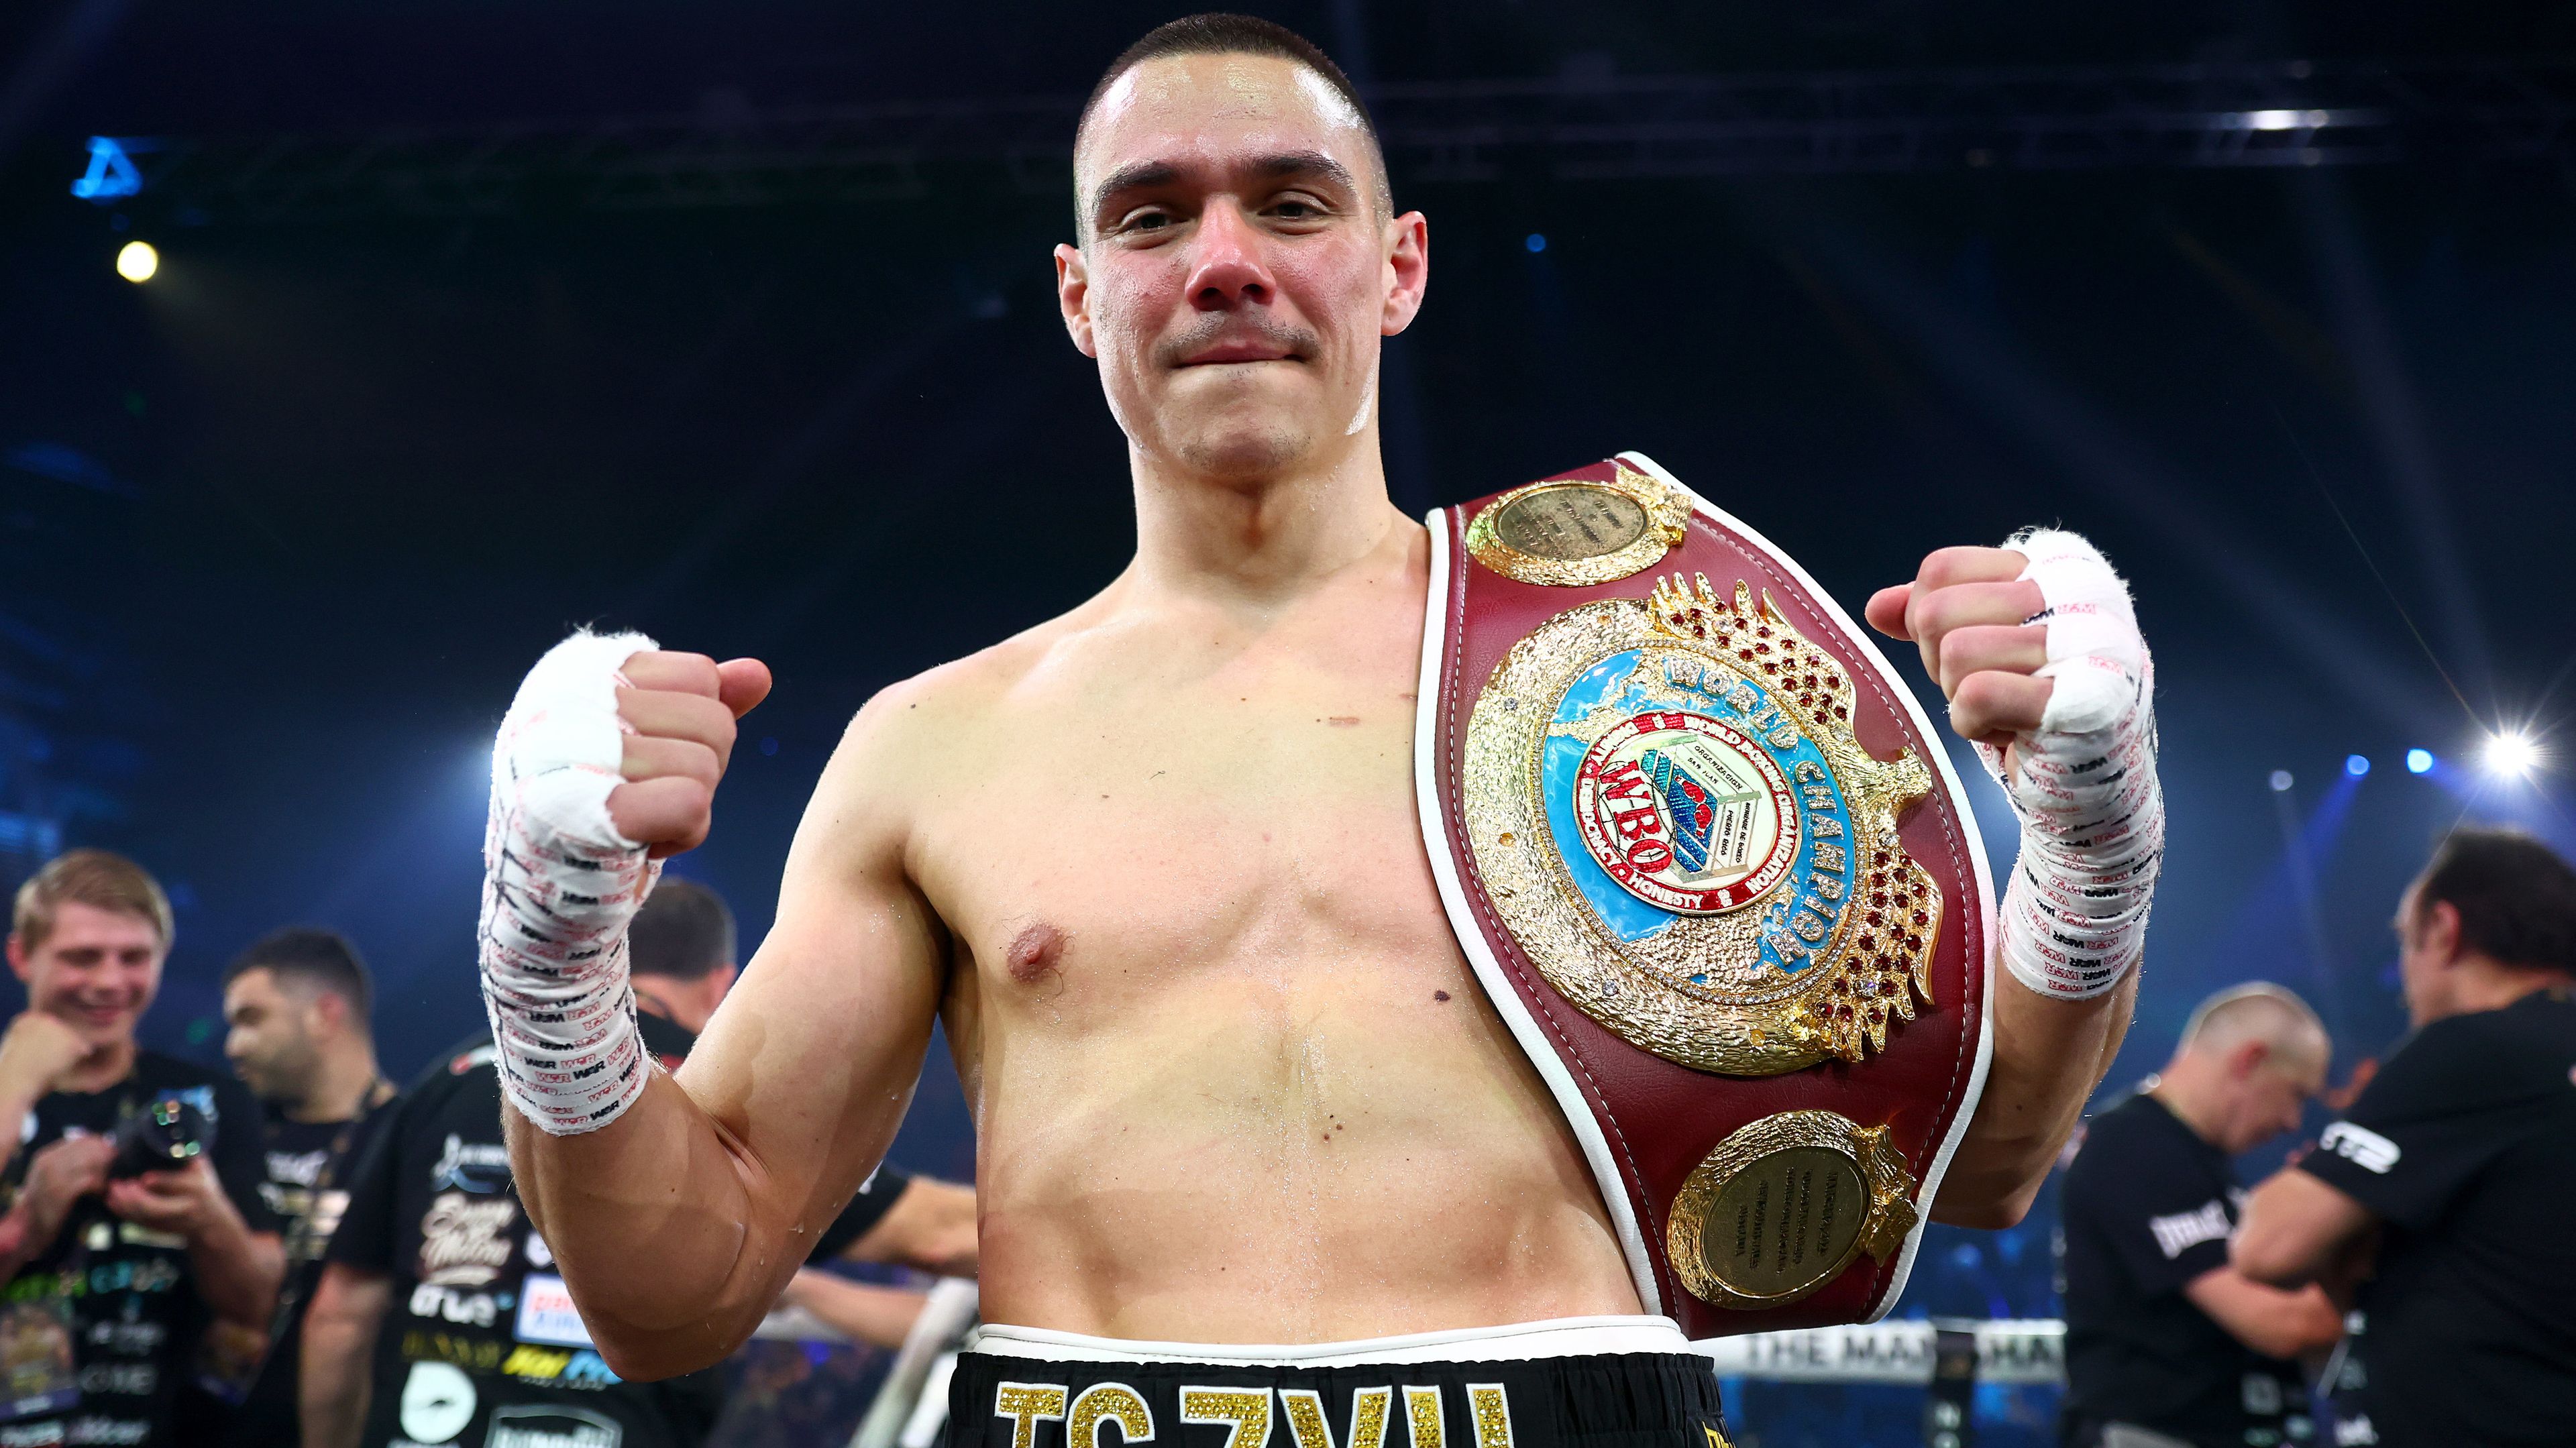 Tim Tszyu poses with the interim title belt after his win over Carlos Ocampo